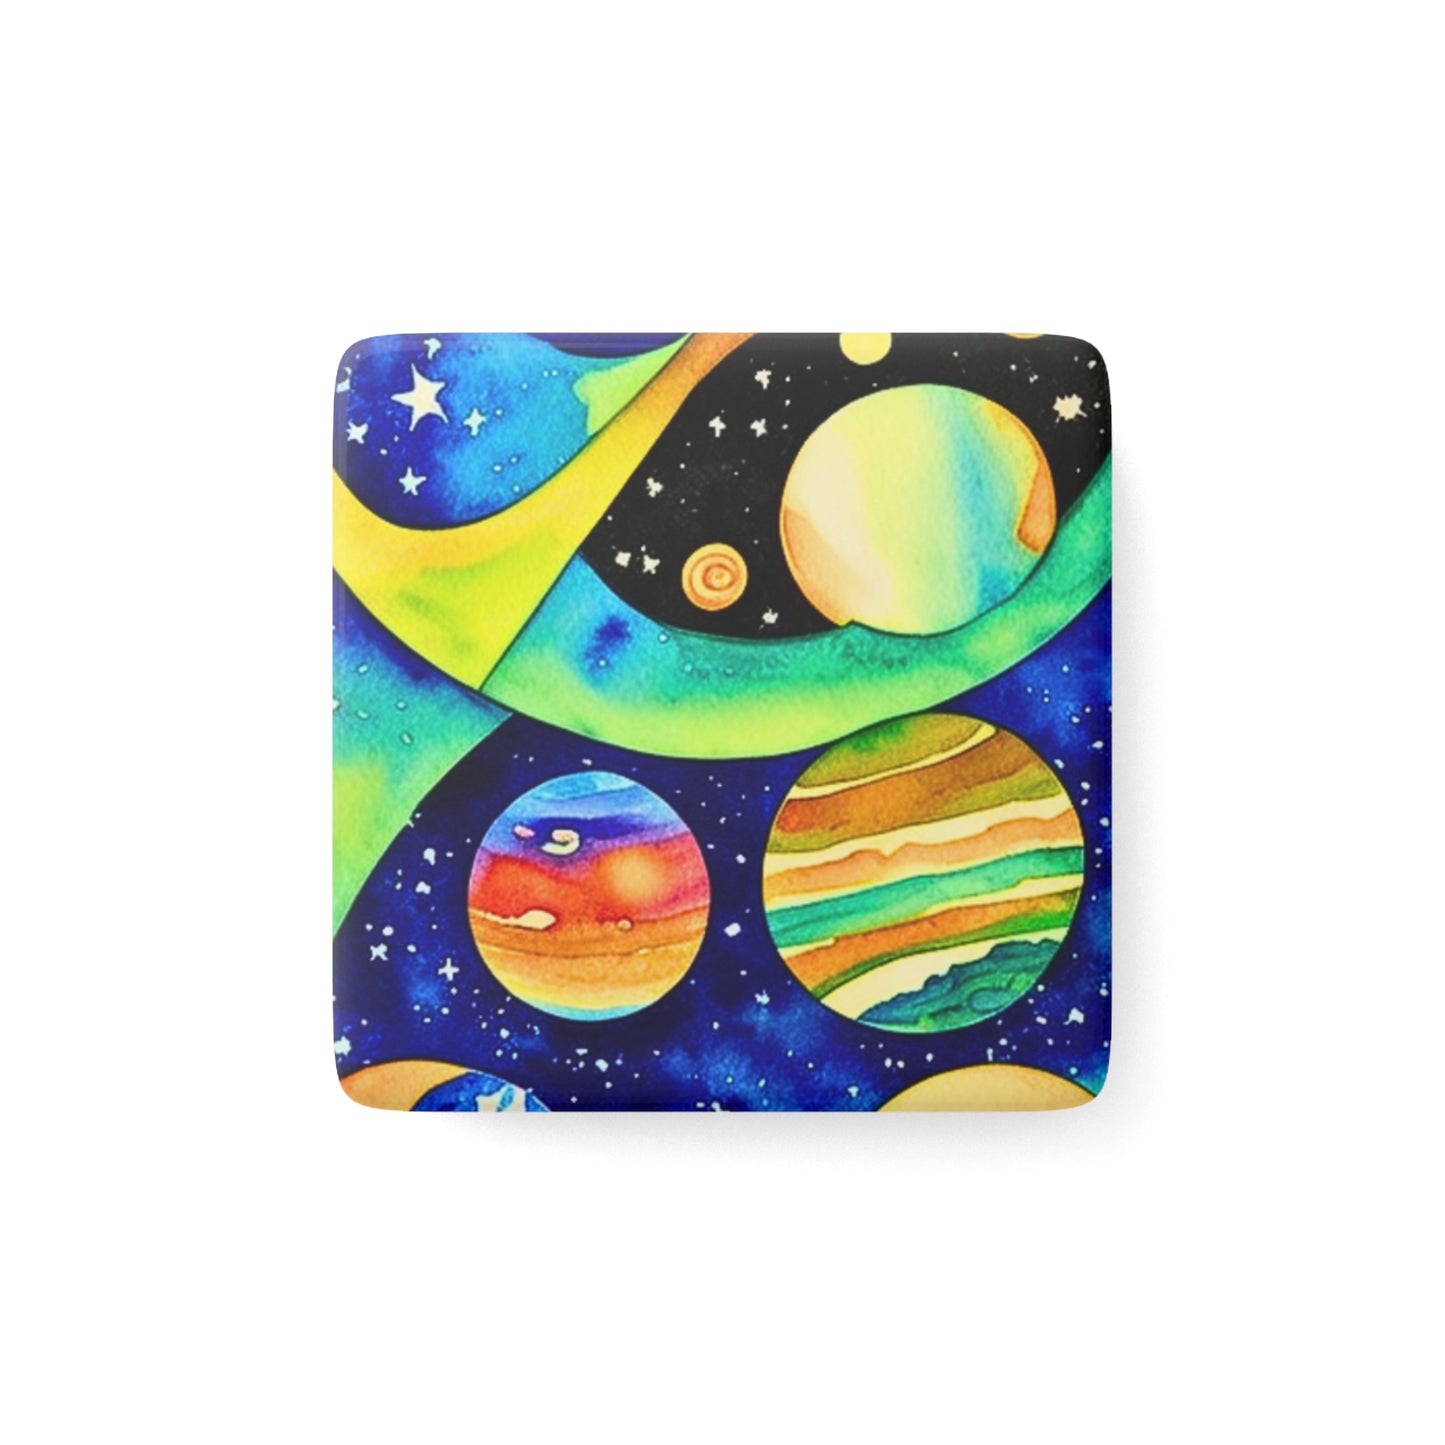 Galaxy Daydreaming Watercolor Painting Decorative Kitchen Porcelain Magnet, Square